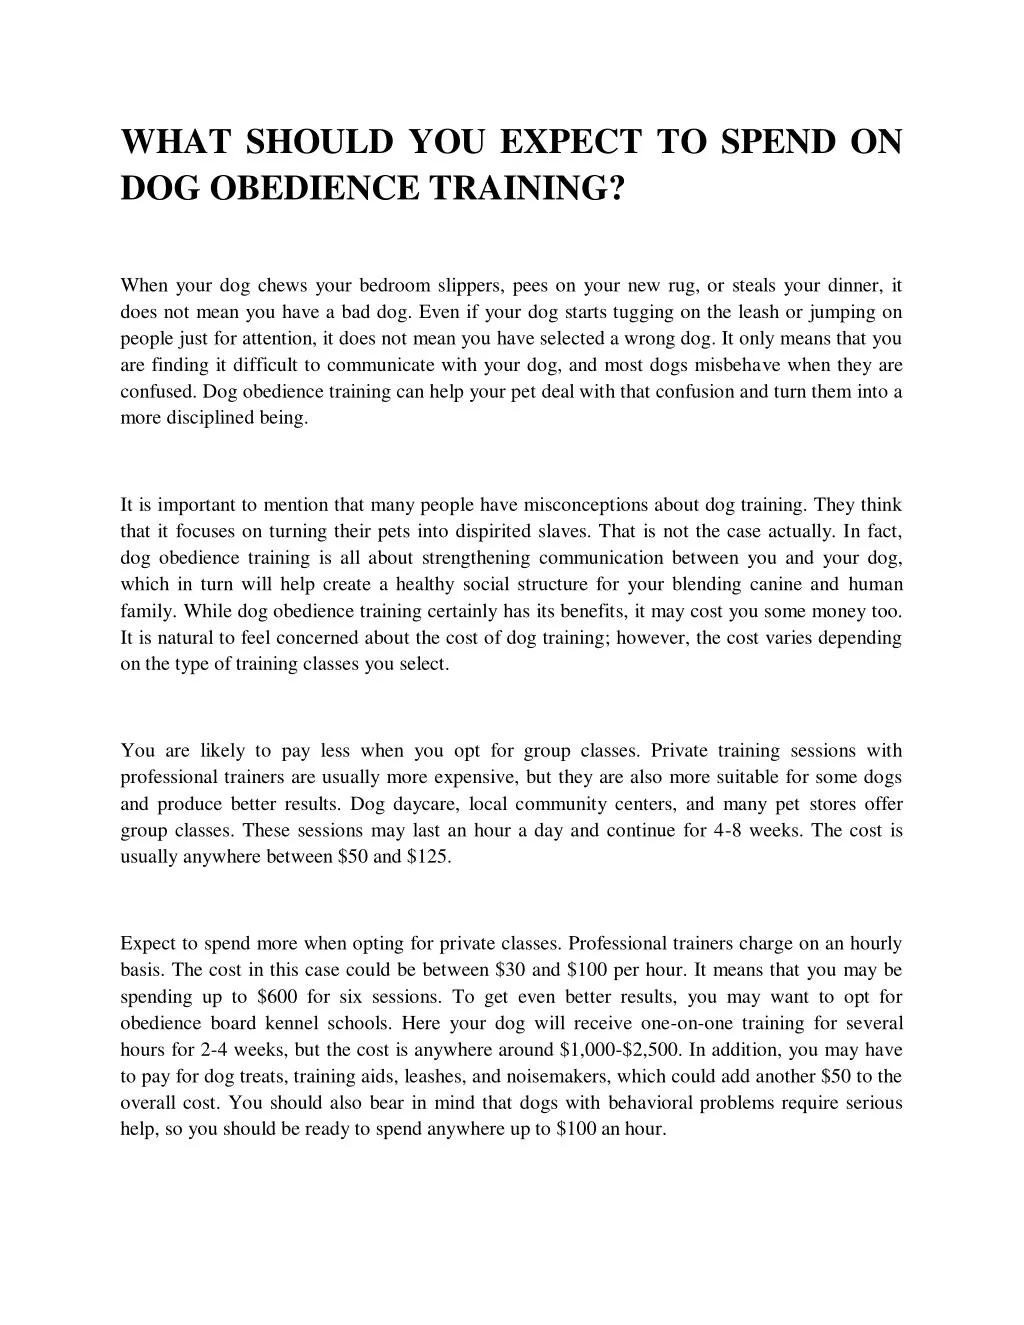 what should you expect to spend on dog obedience